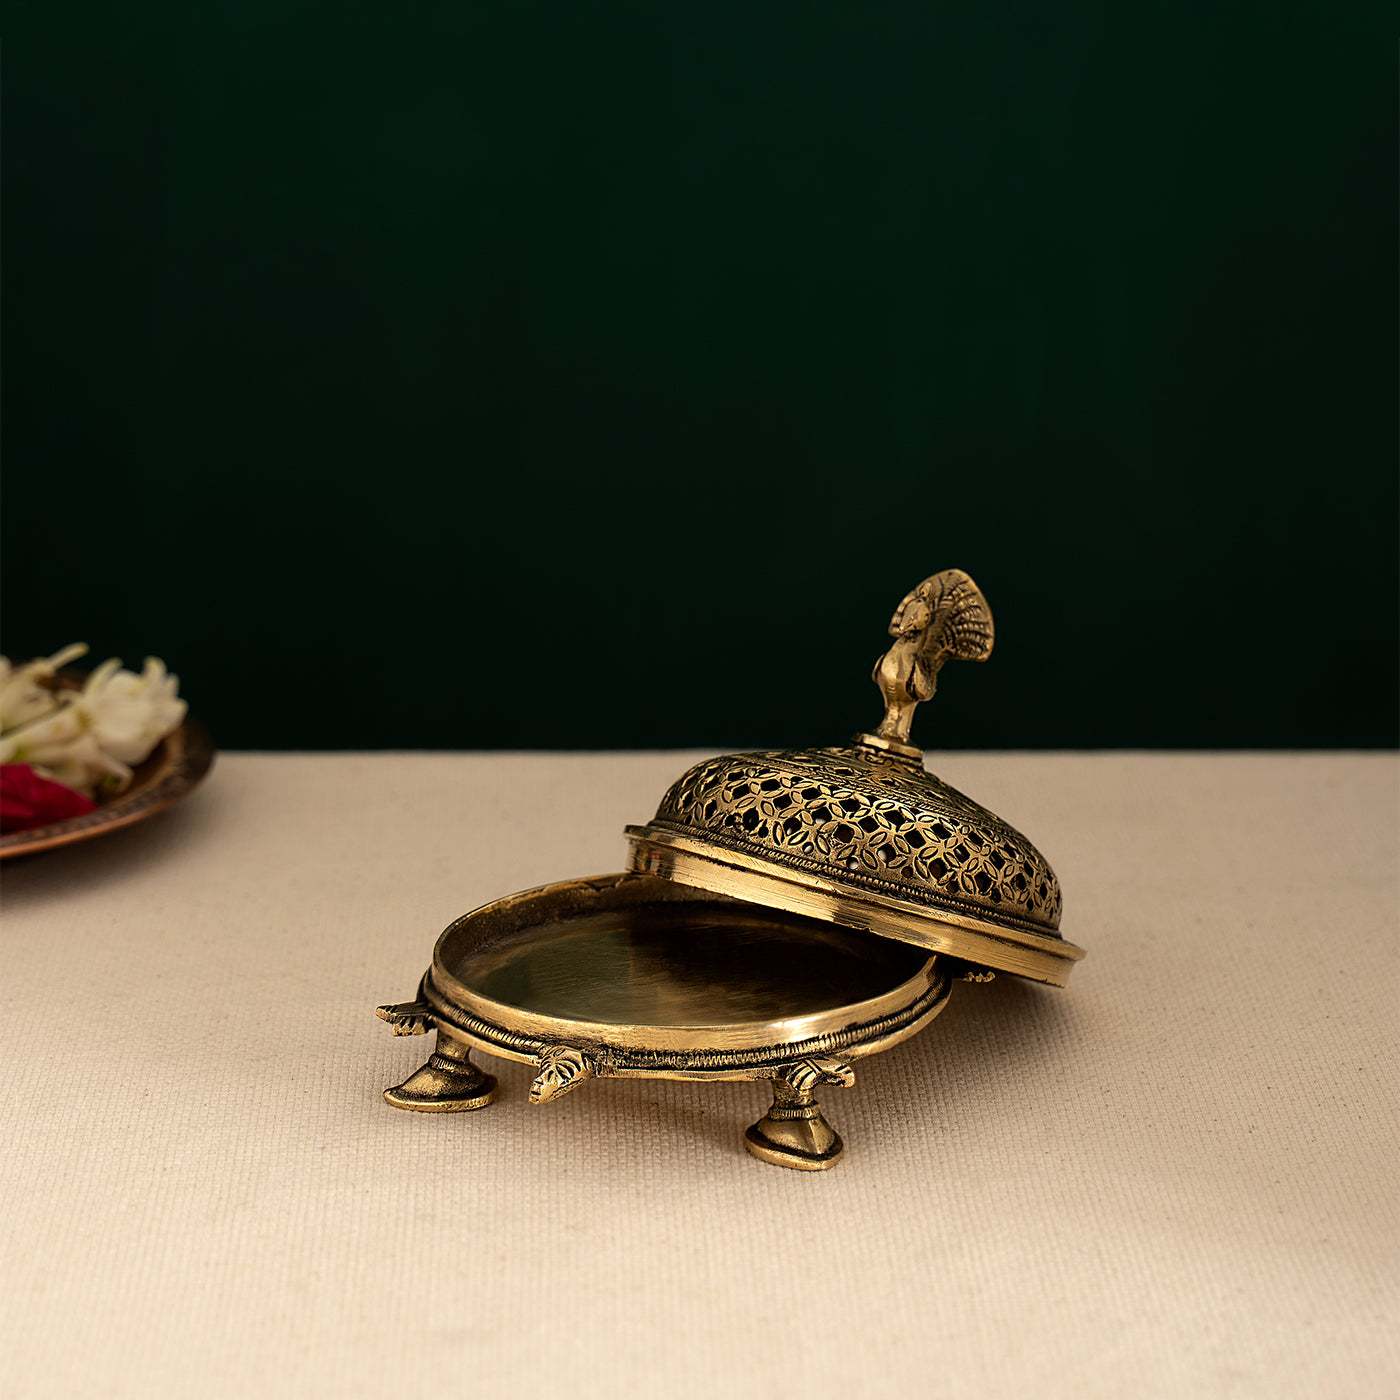 Brass Peacock Incense Burner With Tortoise Base